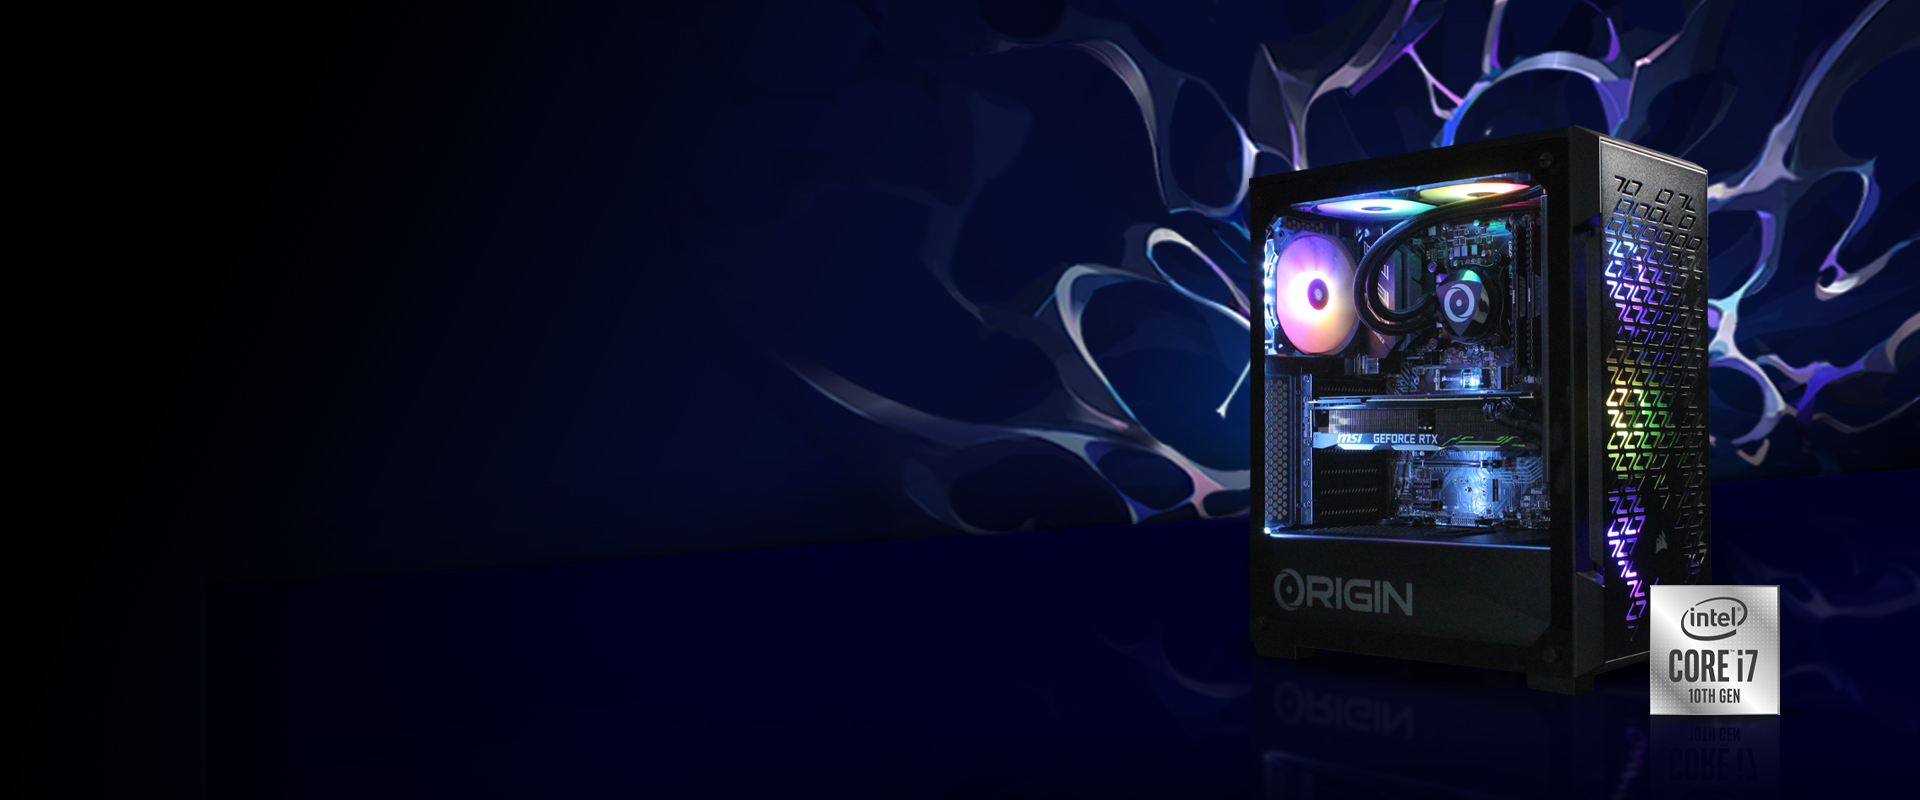 ORIGIN PC NEURON Giveaway Powered by ORIGIN PC and Intel